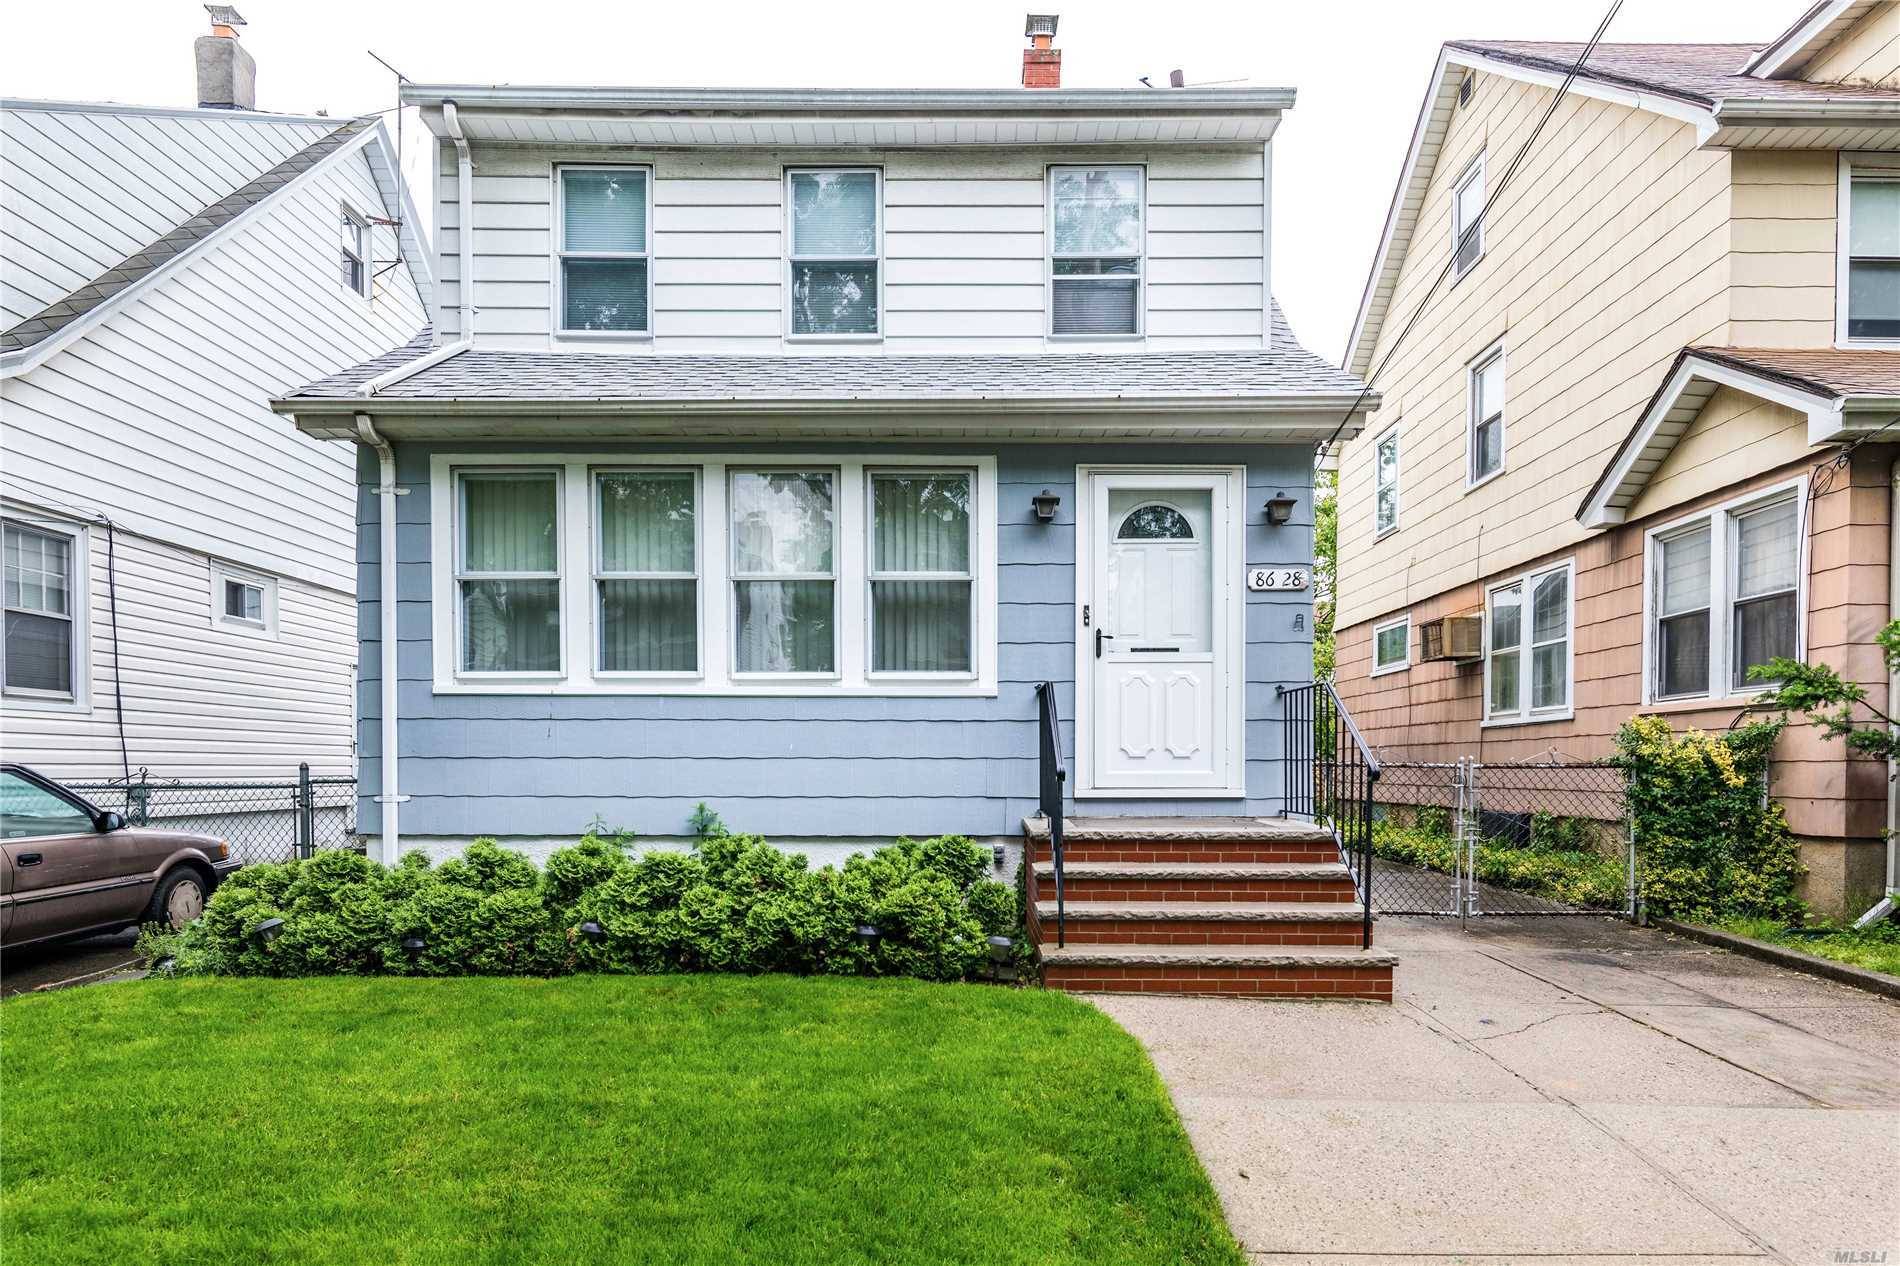 Queens Village Legal 2 Family Home Located In Bellerose Manor For $678,000.